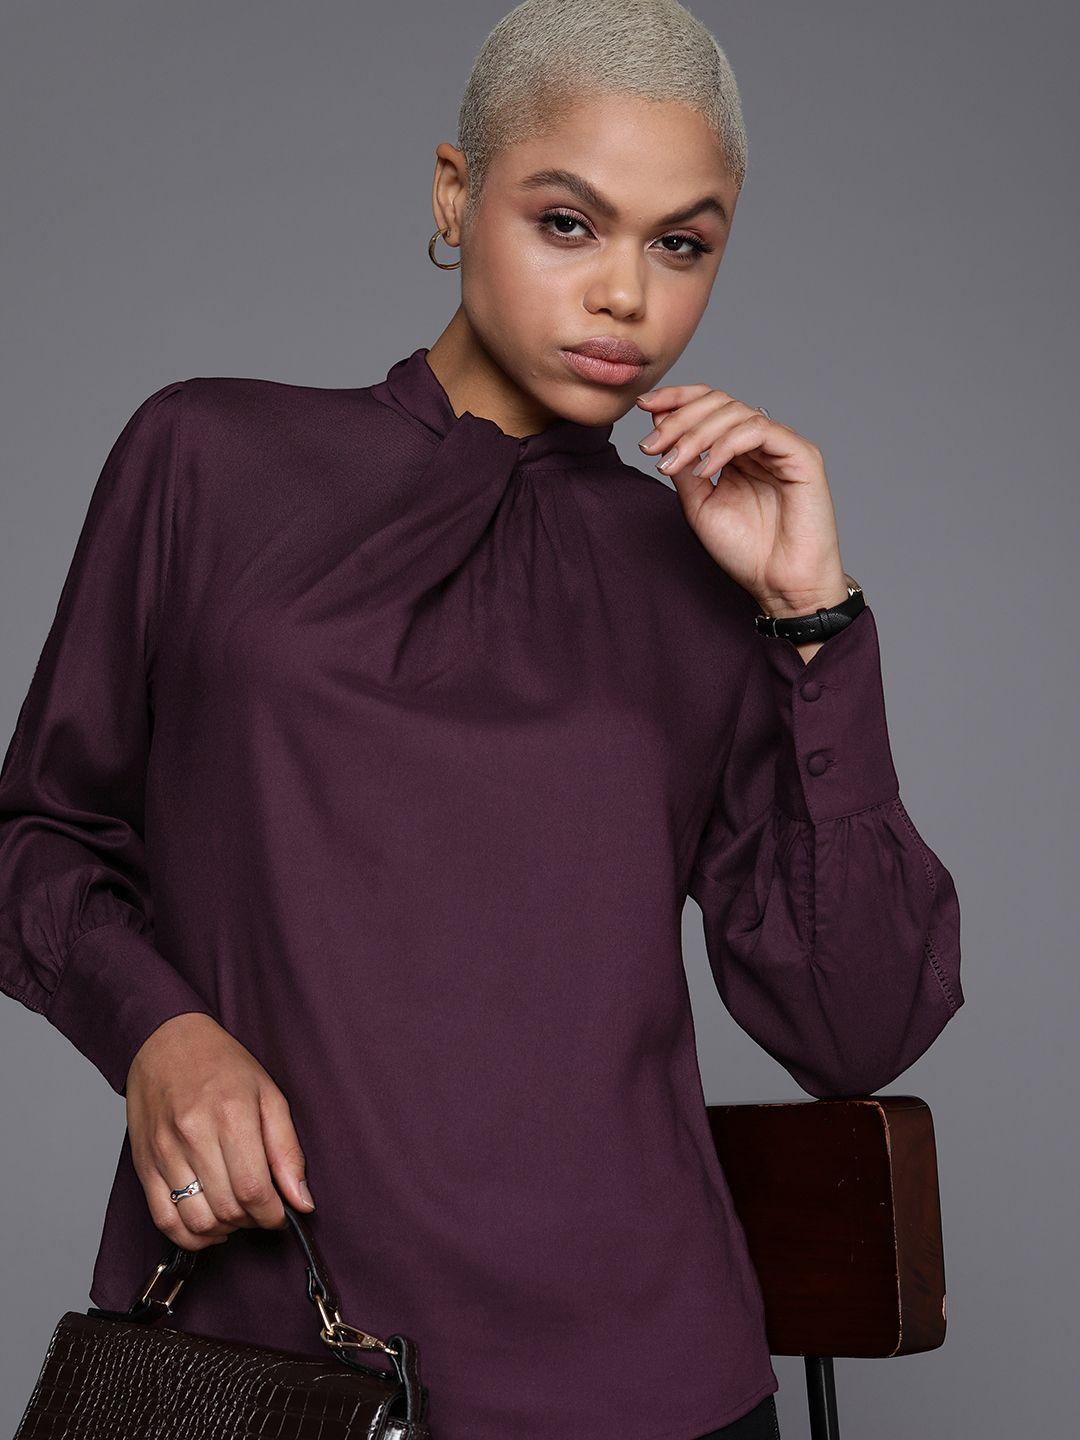 kenneth-cole-annodata-purple-knotted-neck-cuffed-sleeves-top